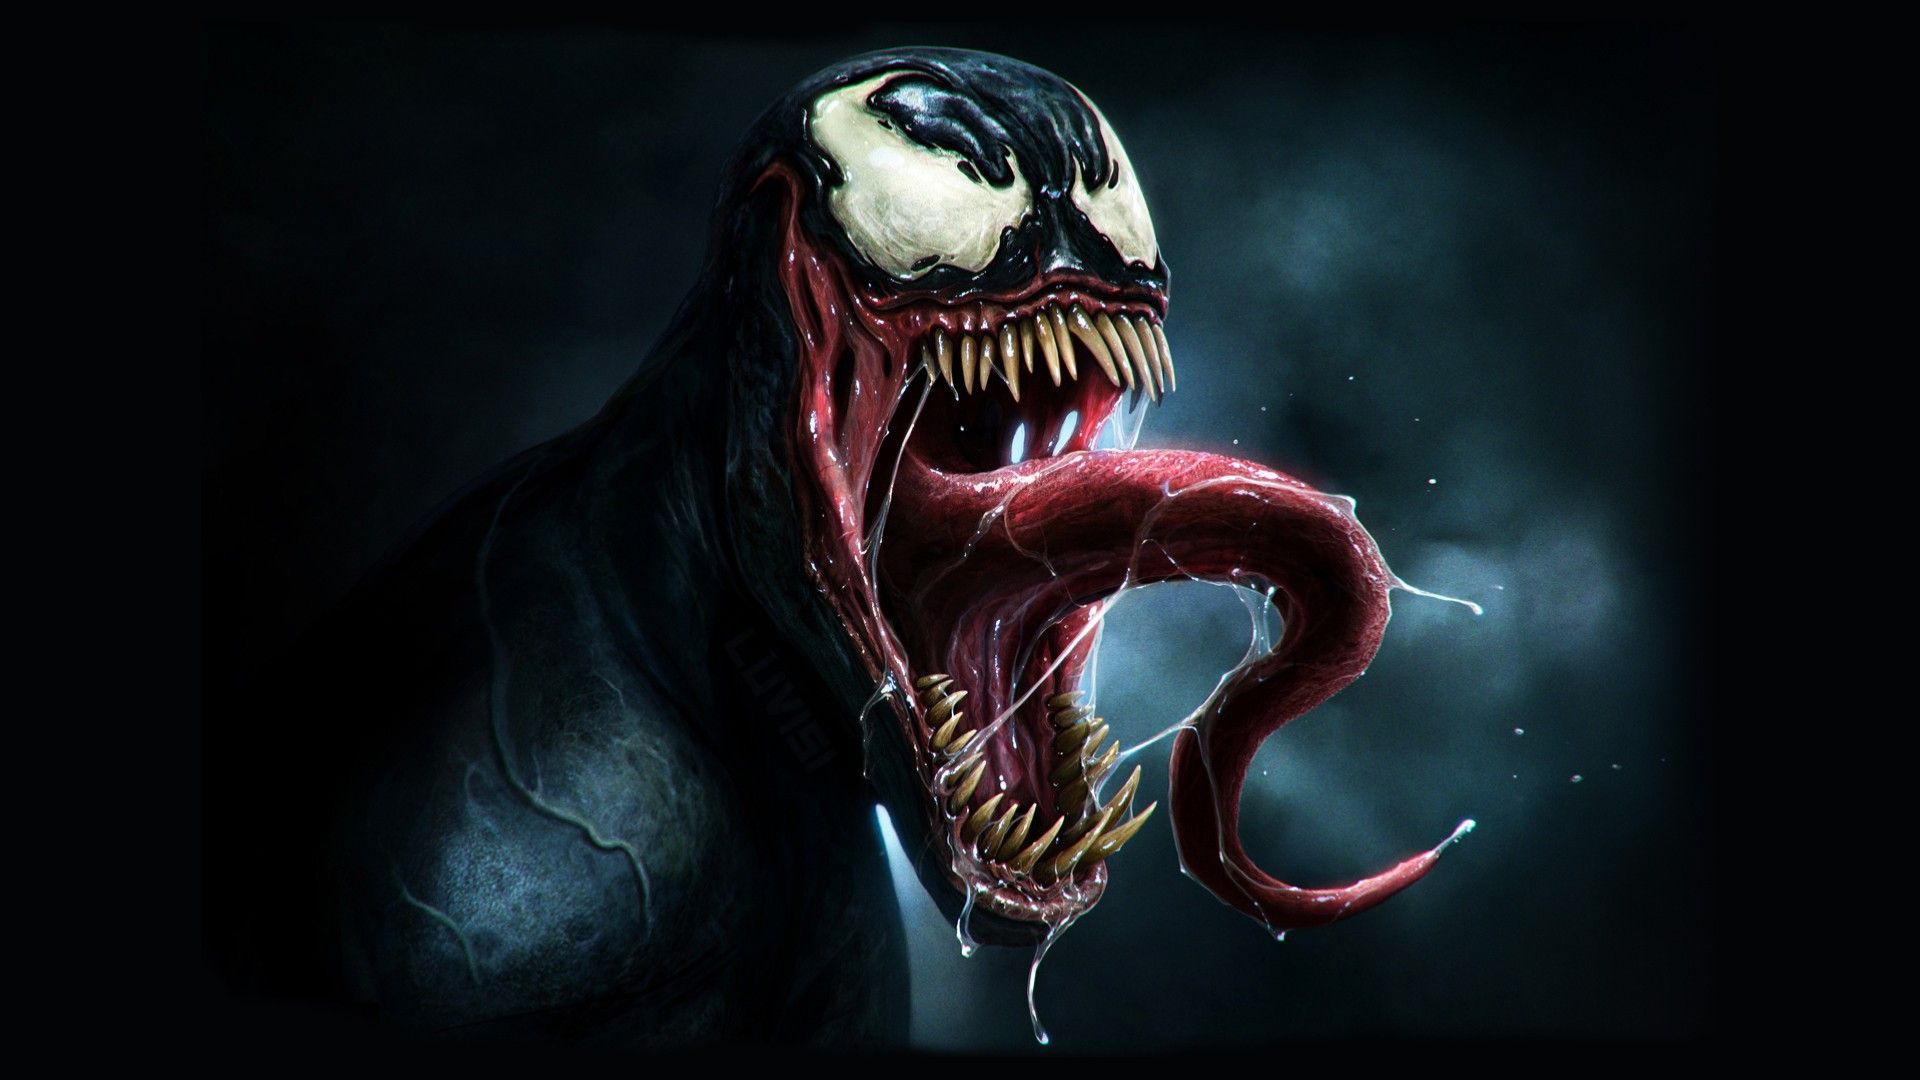 Smile, Fangs, Marvel comics wallpapers and images - wallpapers ...